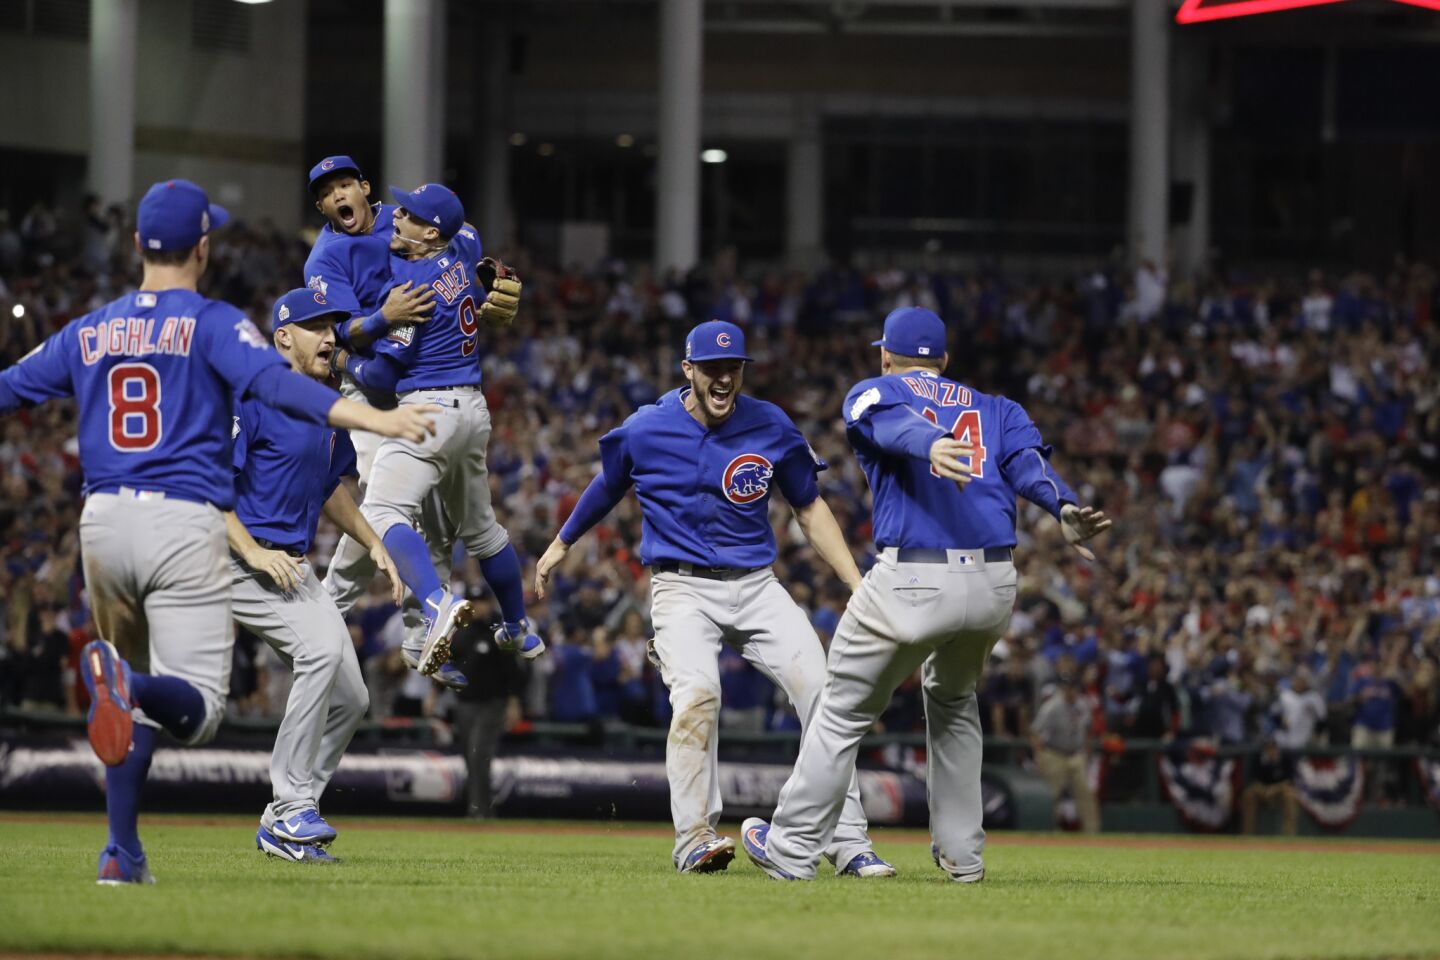 Cubs win the World Series